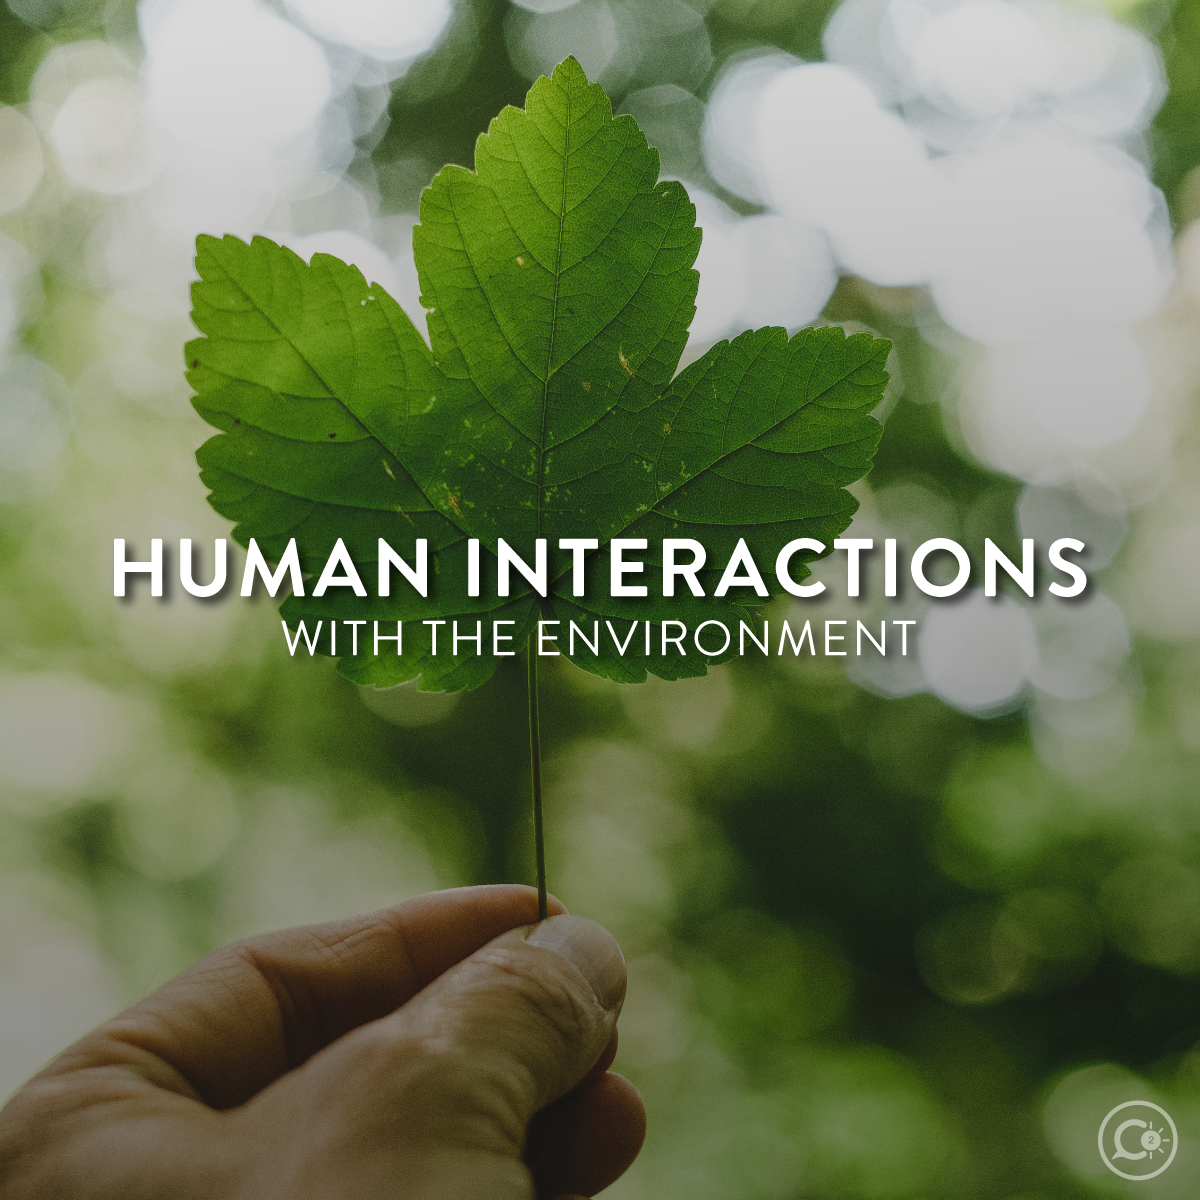 Human Interactions with the Environment